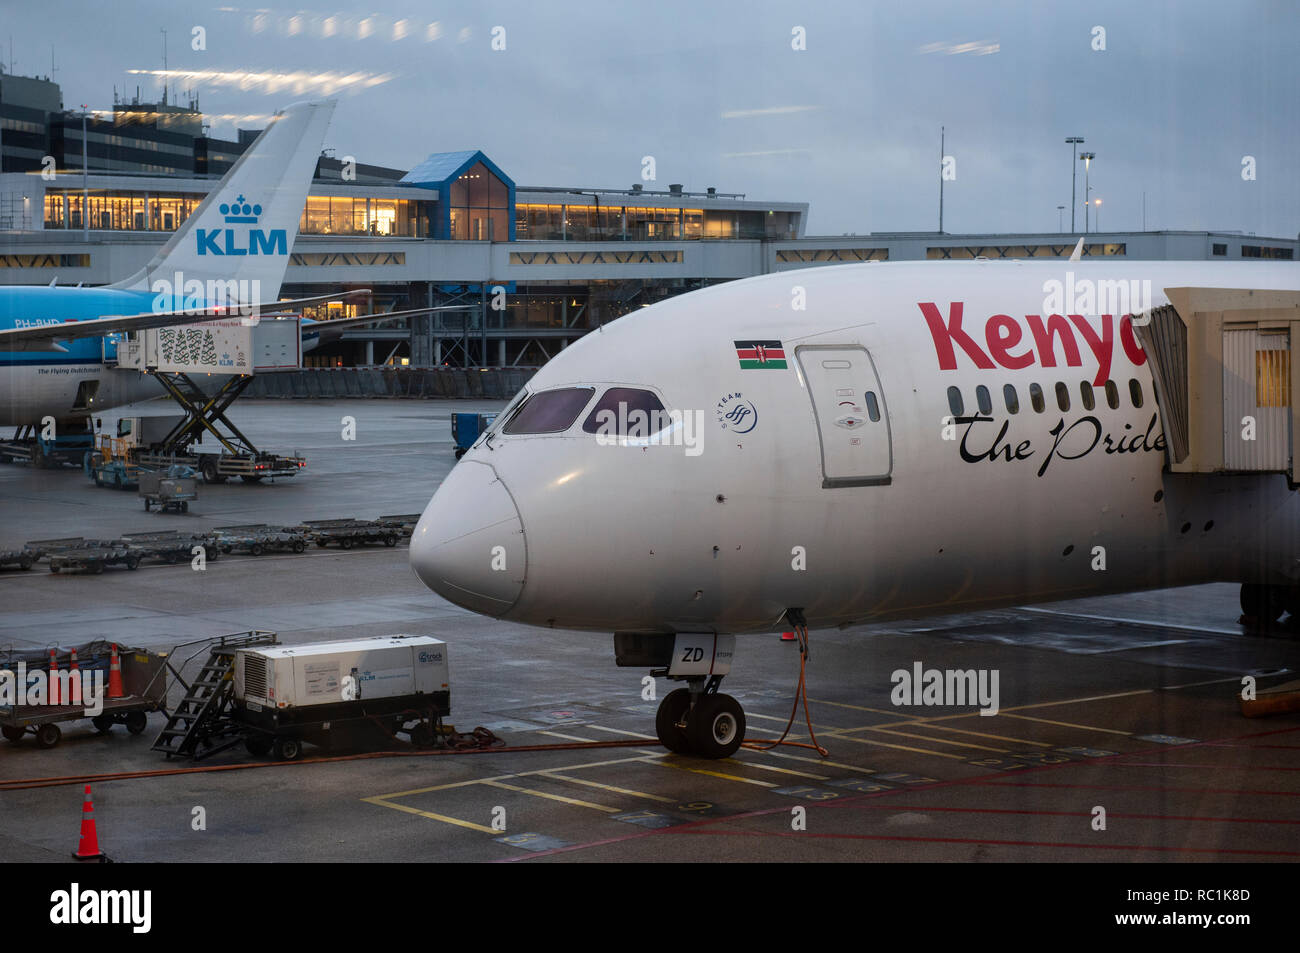 Kenya Airways and KLM Royal Dutch Airlines planes are seen at Amsterdam Schiphol Airport runway. Stock Photo